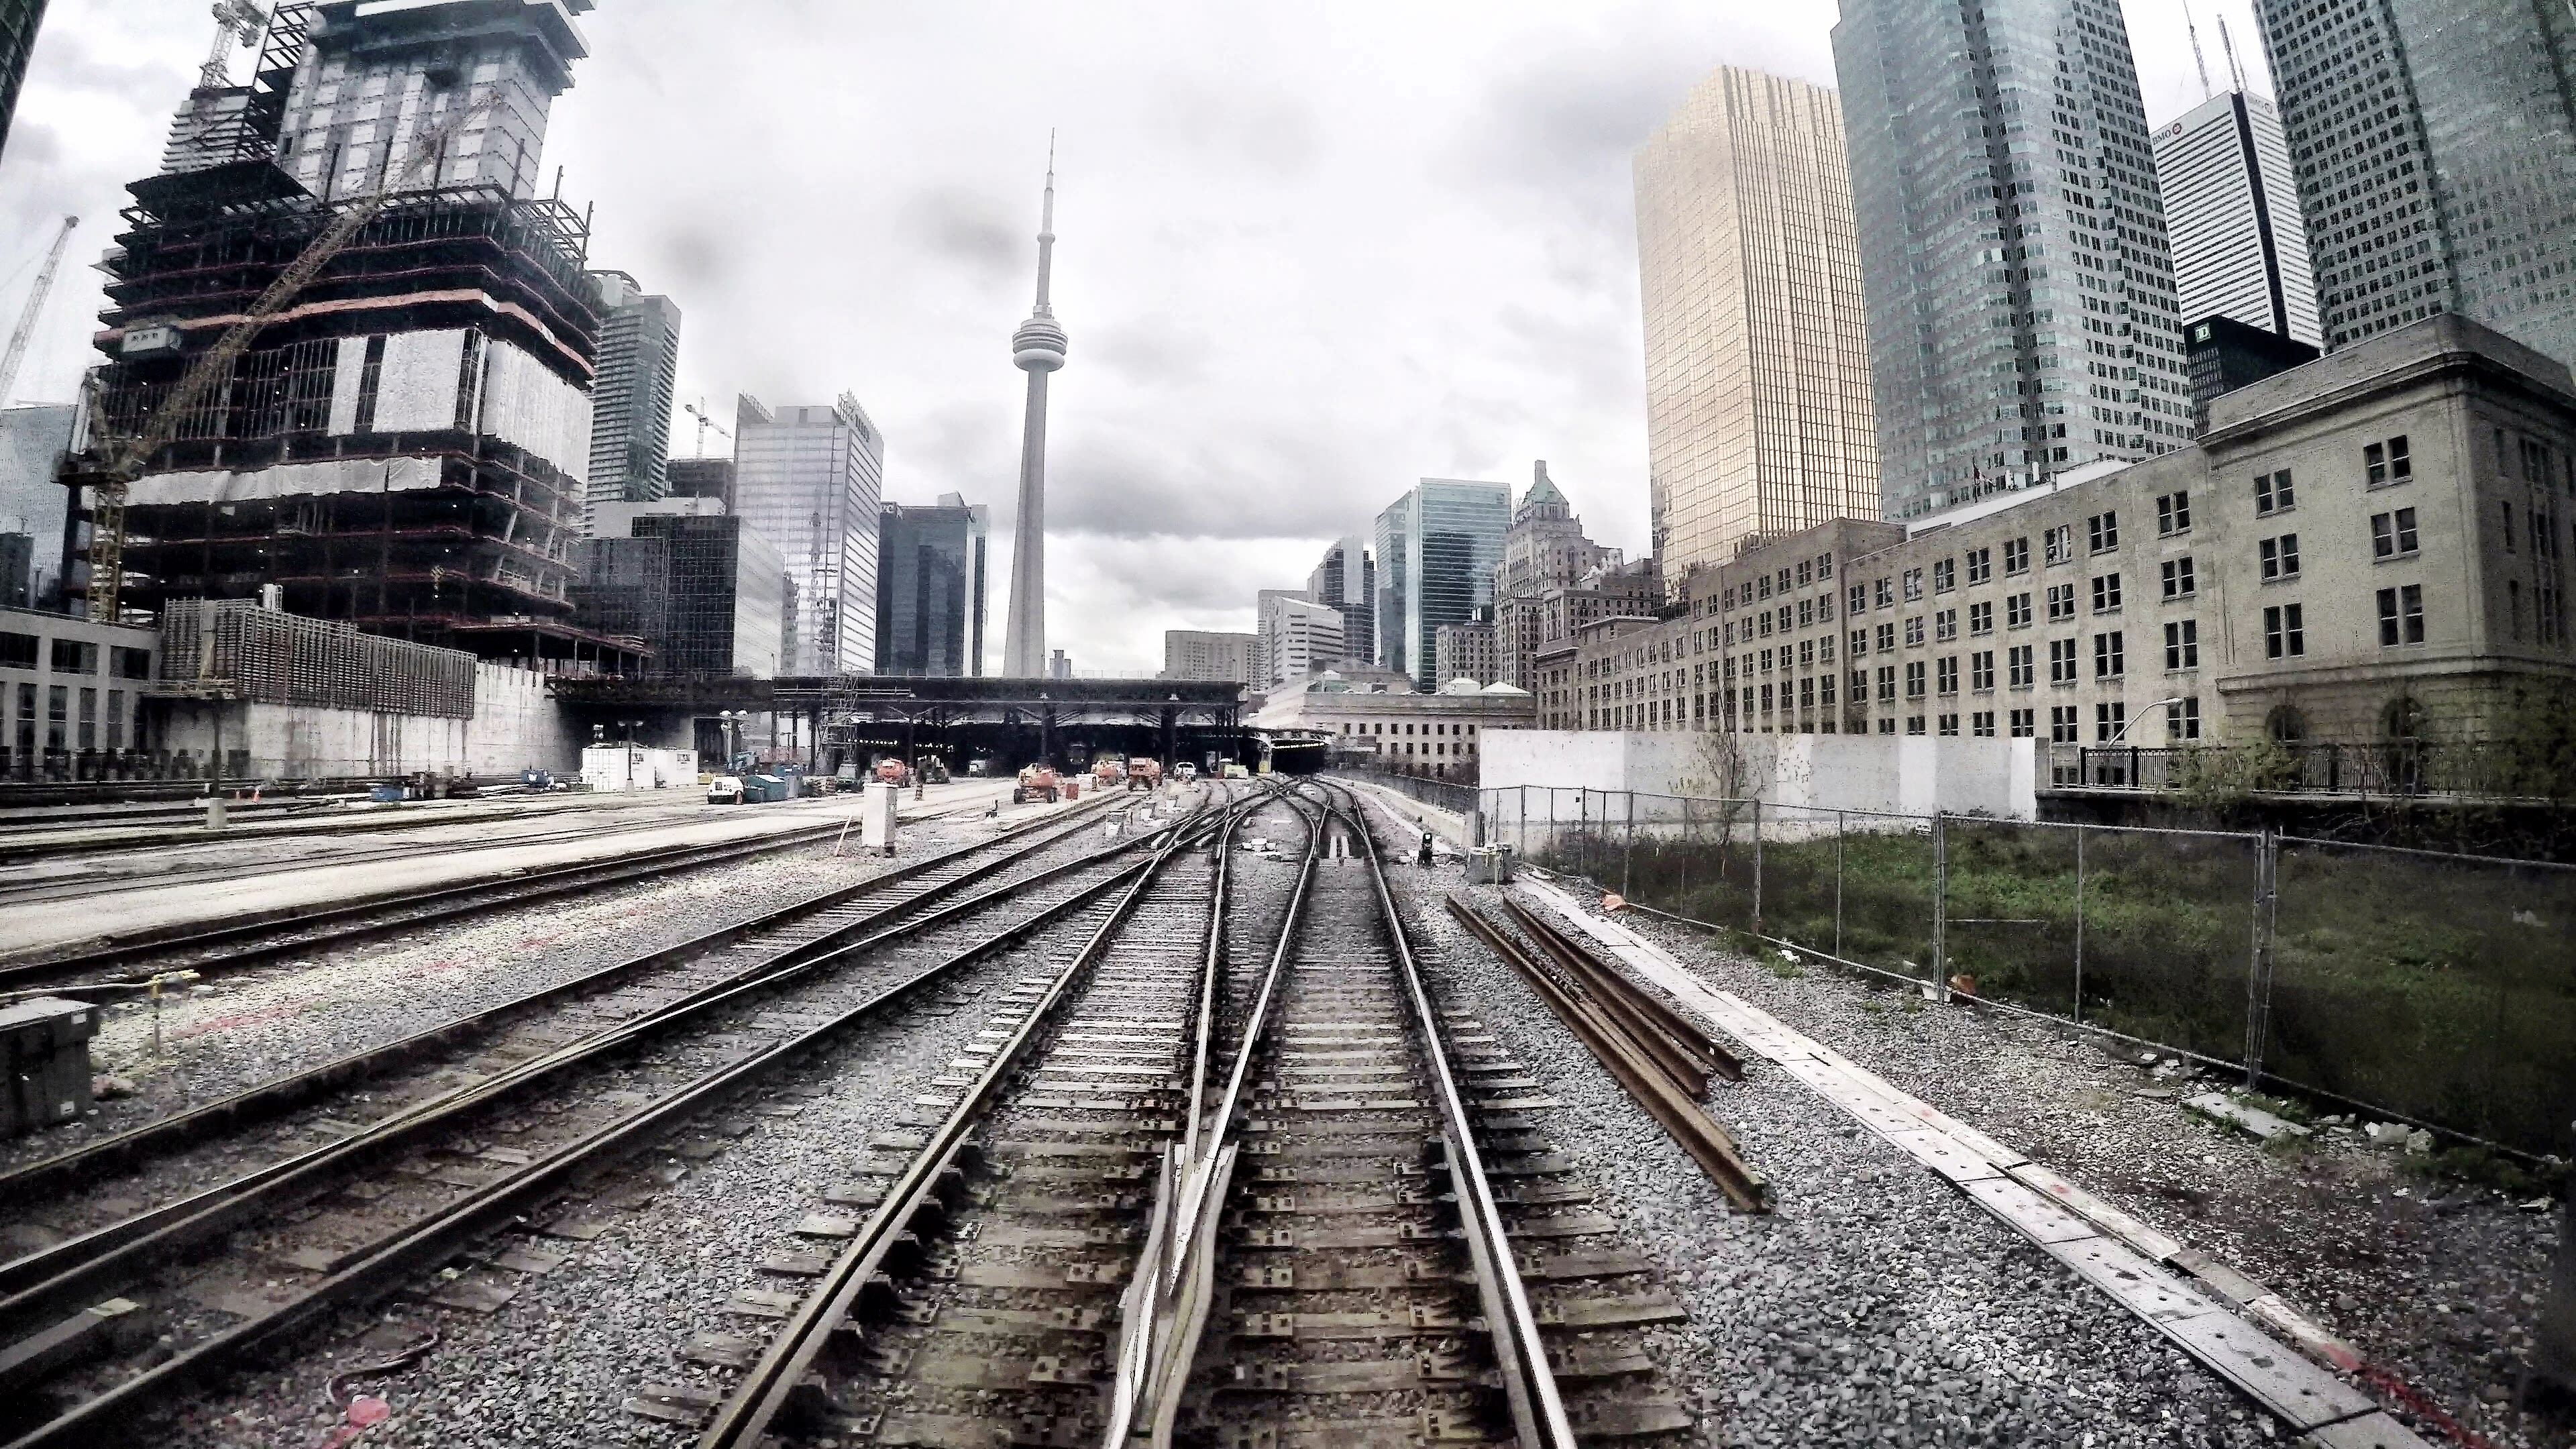 rail lines with no traffic. The lines stretch into Toronto's Union Station.